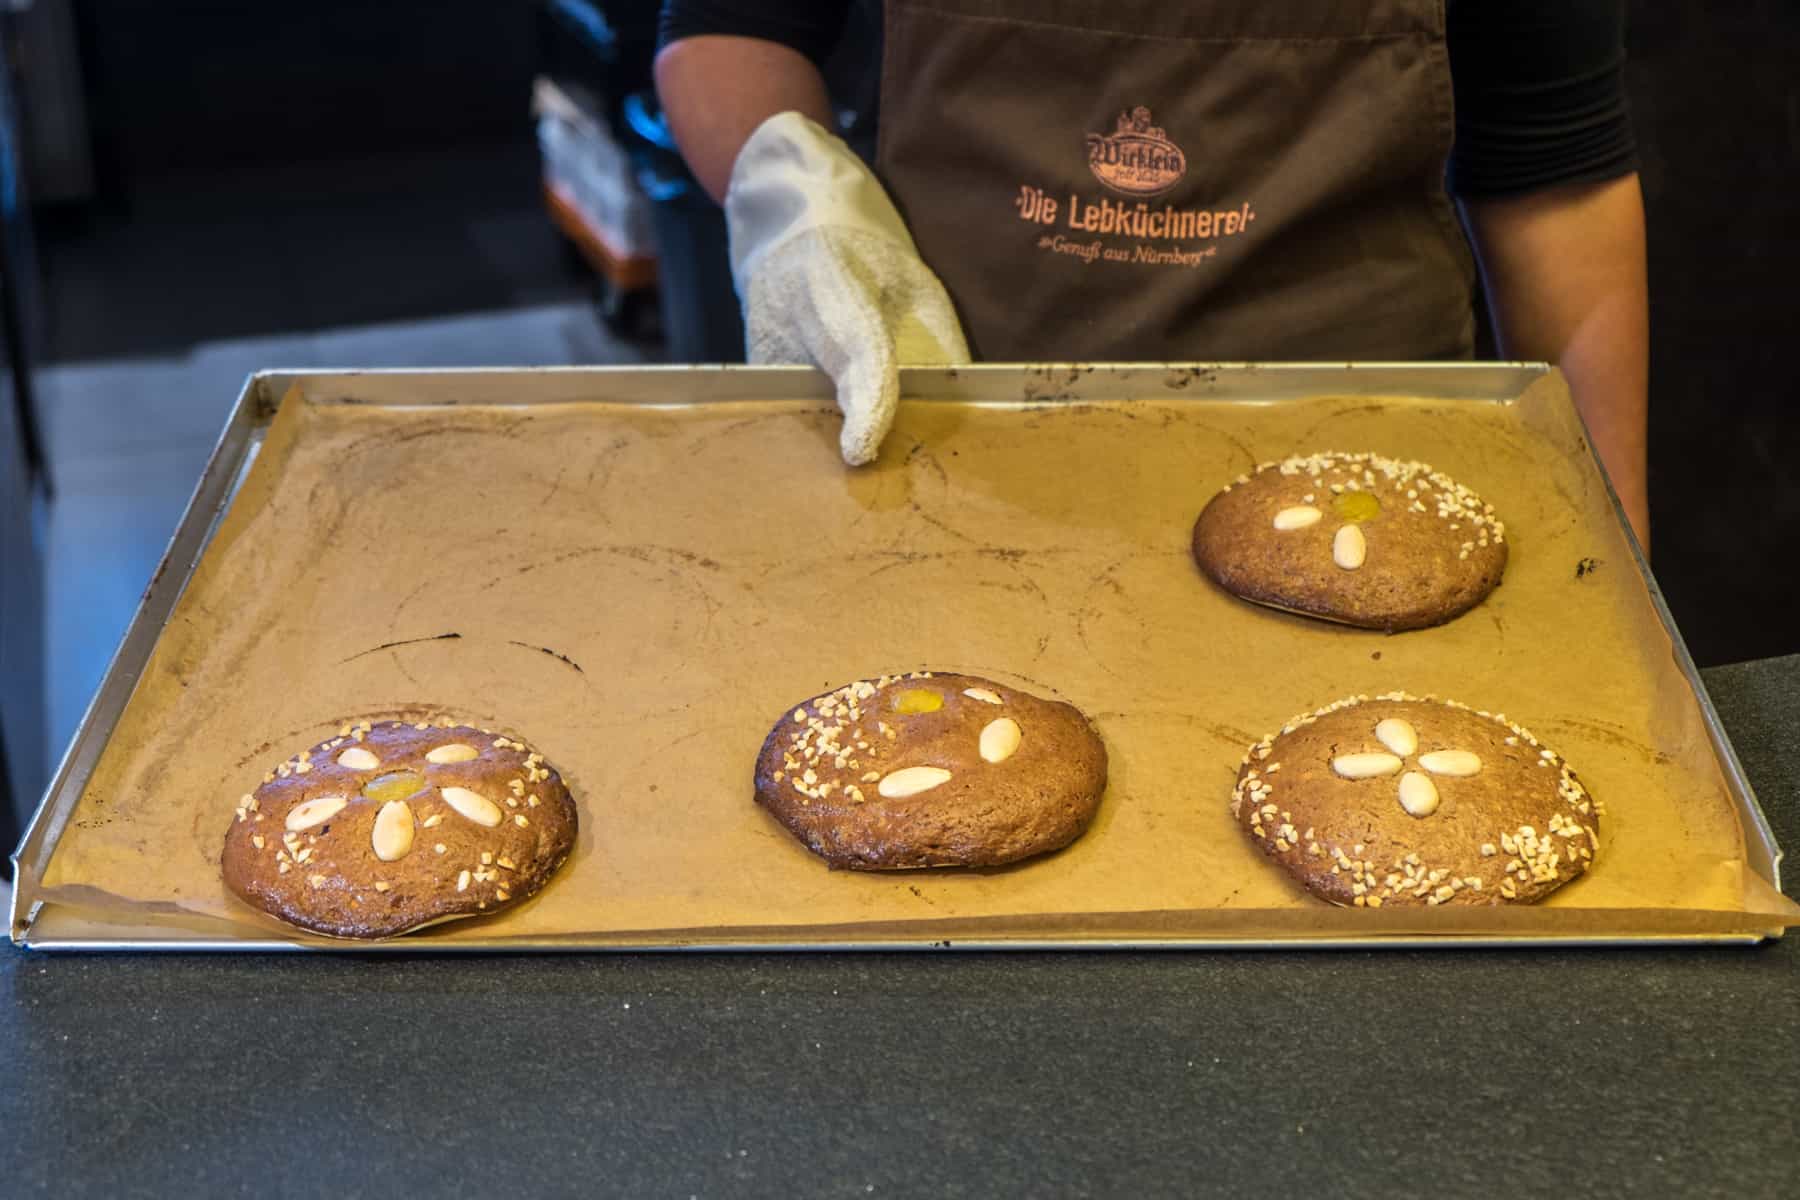 Four baked Nuremberg Lebkuchen gingerbread creations made during a gingerbread baking class for tourists